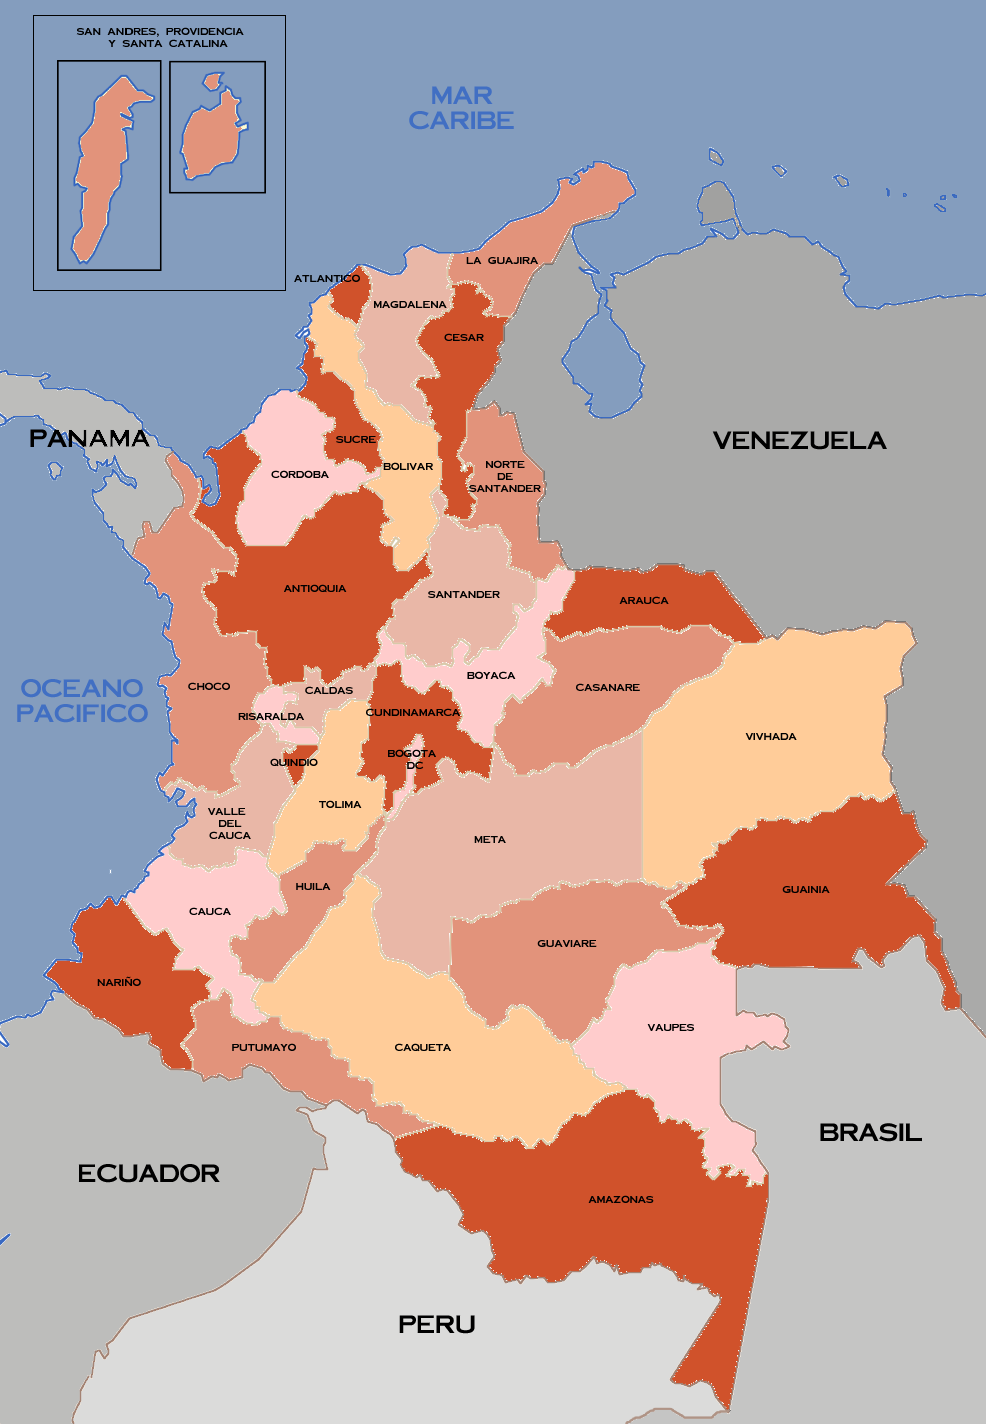 A map of the departments (equivalent to a U.S. state) of Colombia. Cuaca, on of the departments that has suffered great human rights violations at the hands of FARC, is located in the southwest of Colombia, bordering the Pacific Ocean.